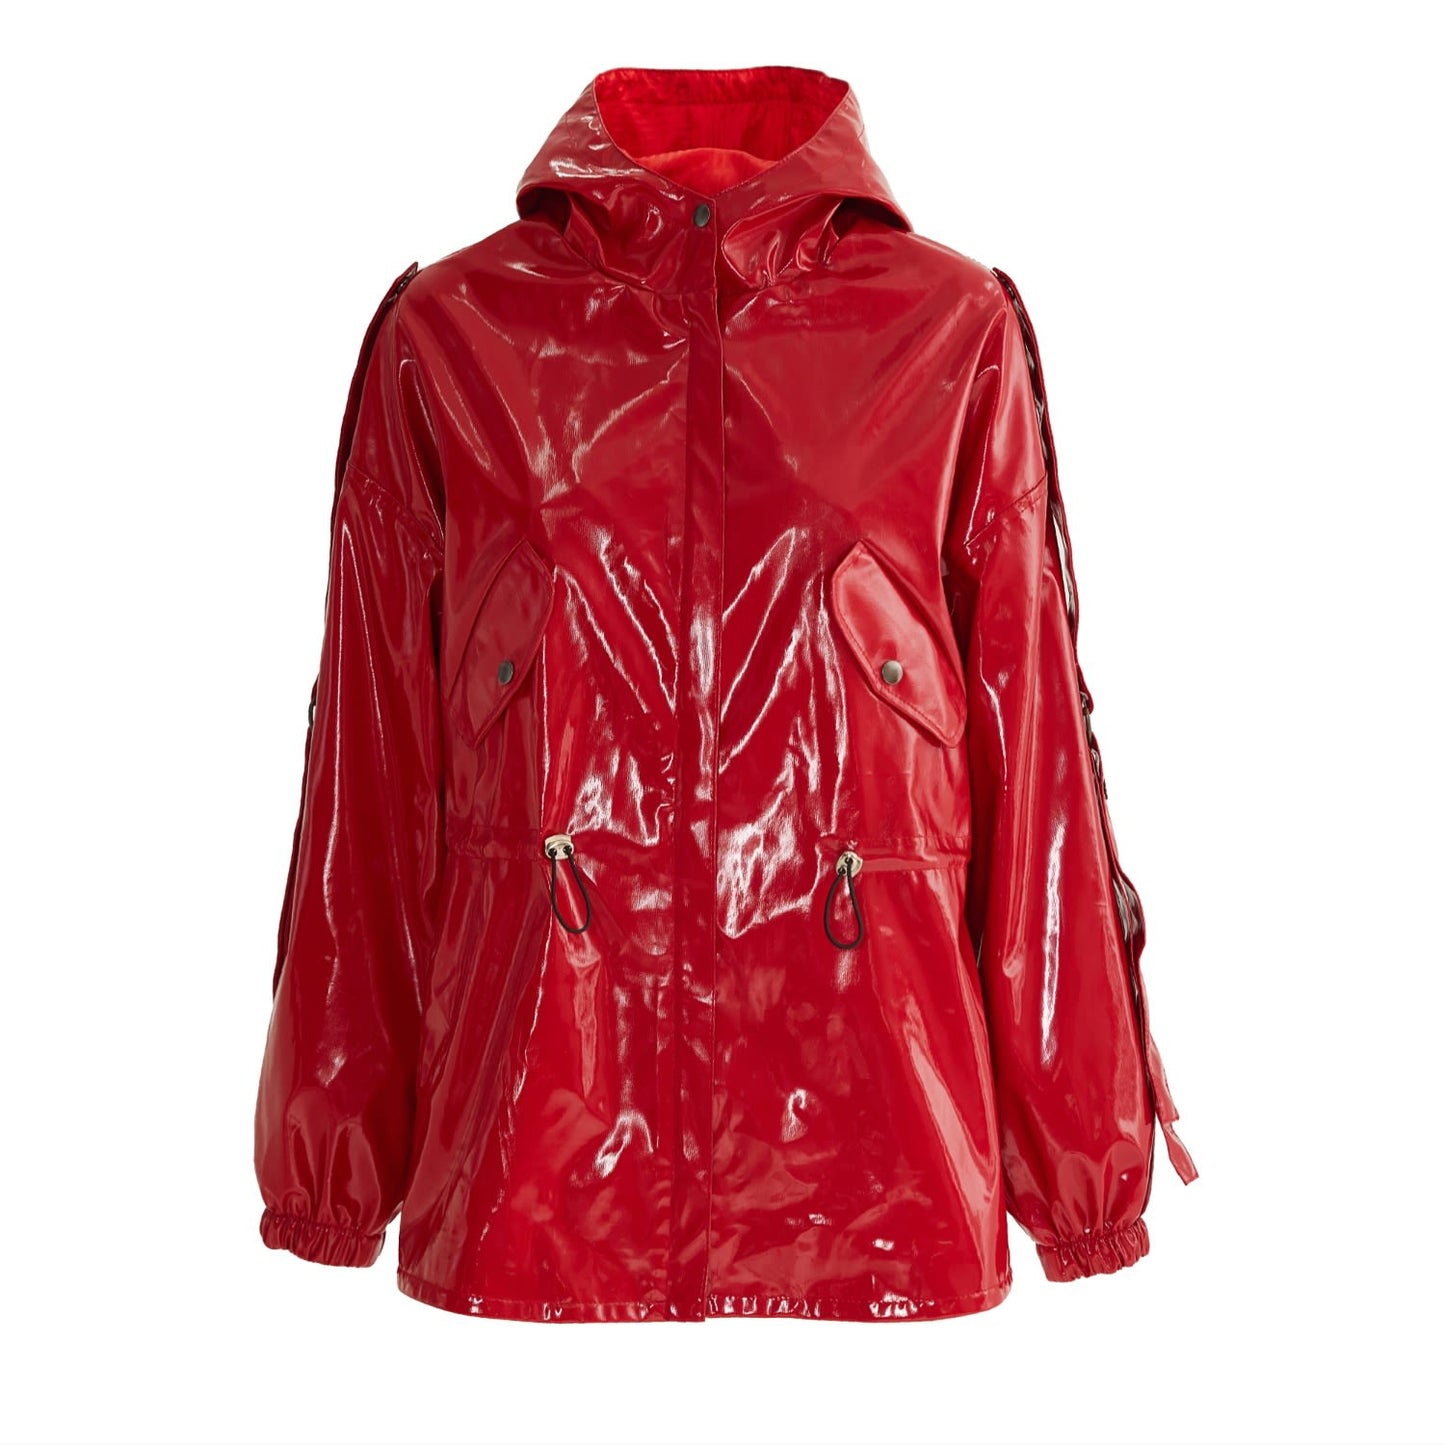 Hooded Lacquer Jacket Bright Red